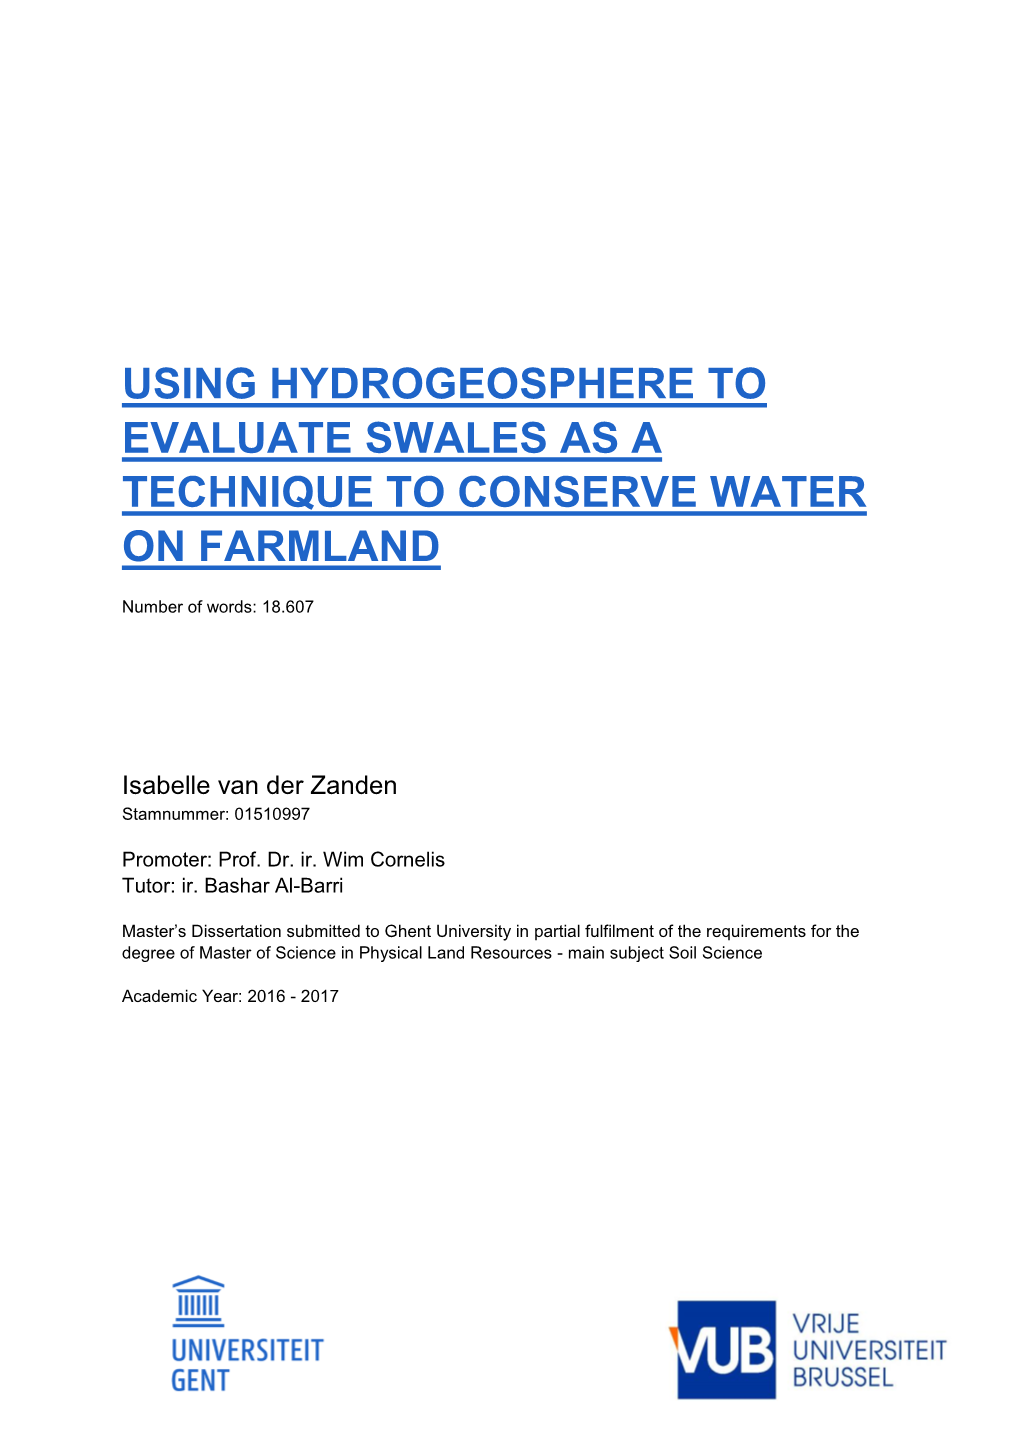 Using Hydrogeosphere to Evaluate Swales As a Technique to Conserve Water on Farmland